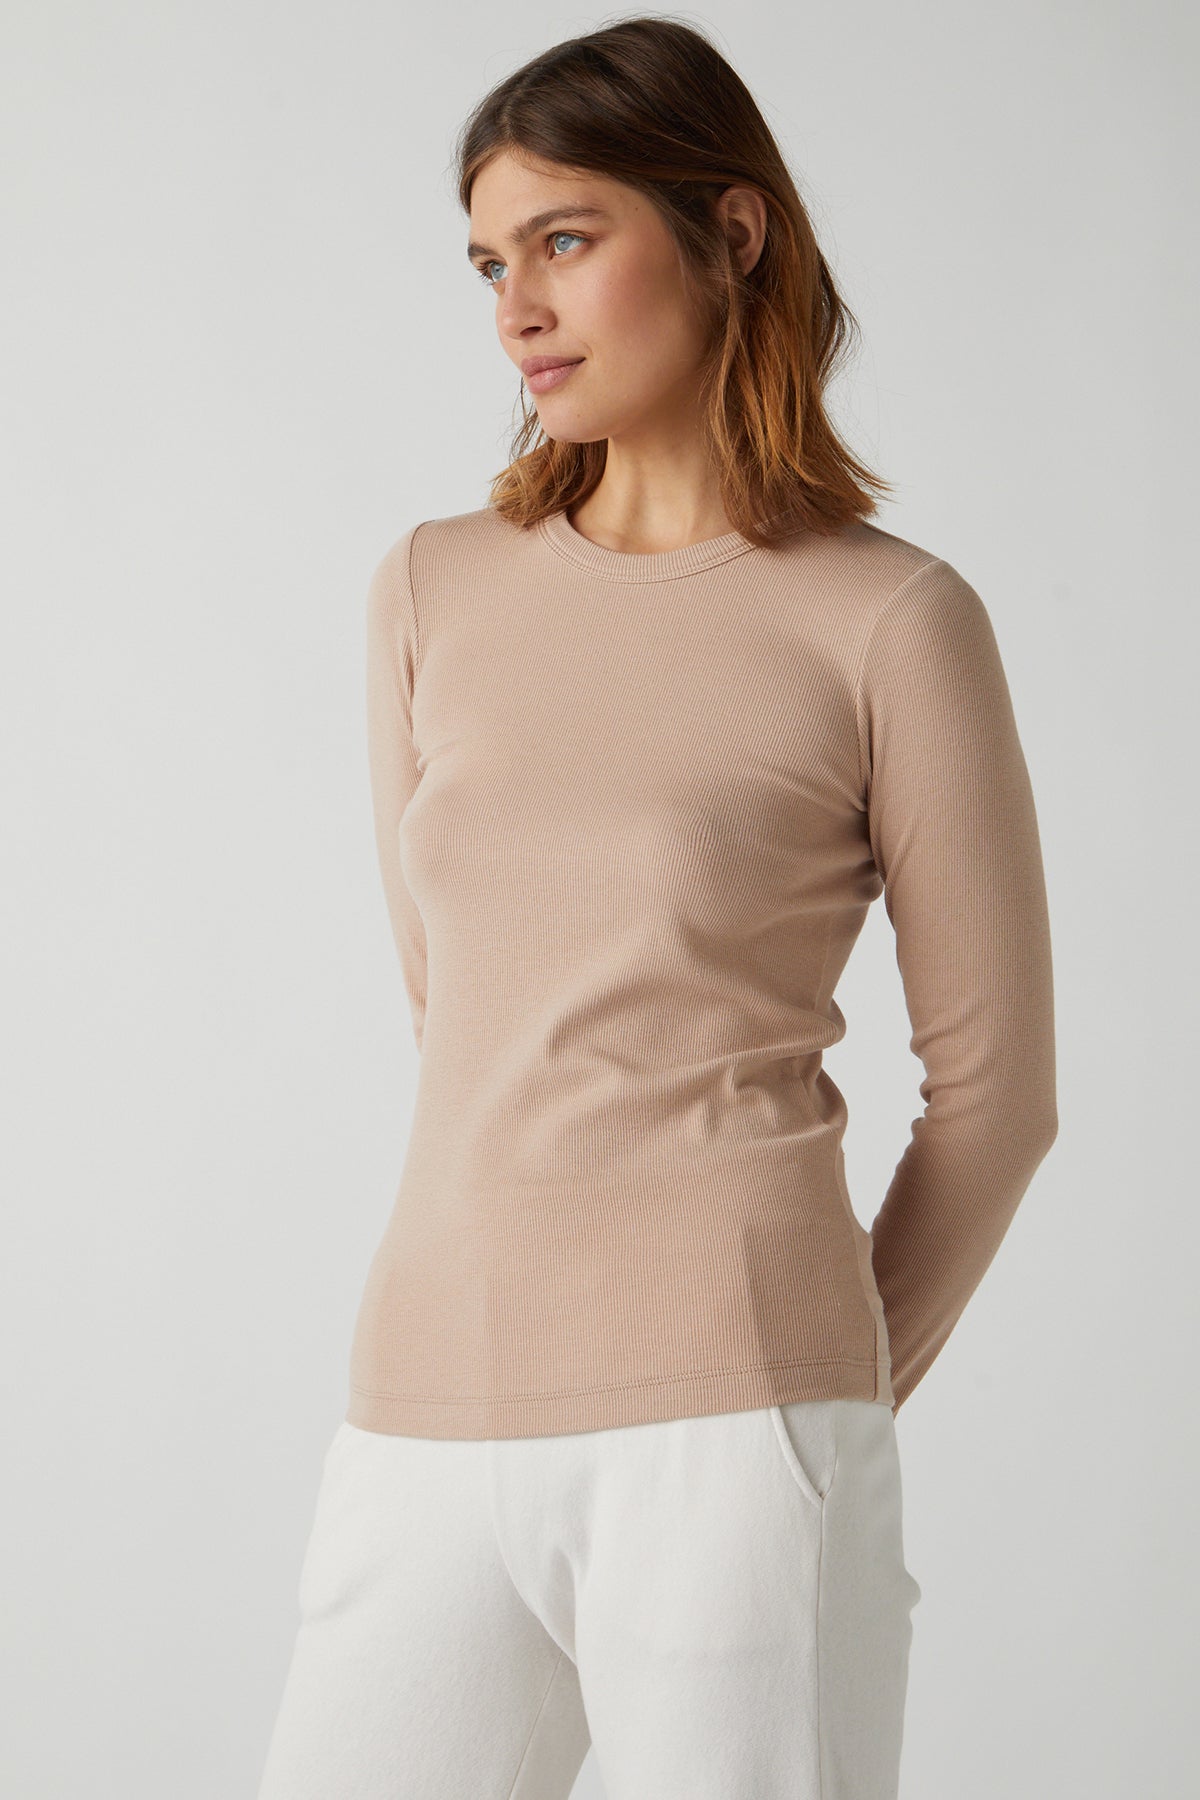   Long Sleeve Camino Tee in nude front & side 